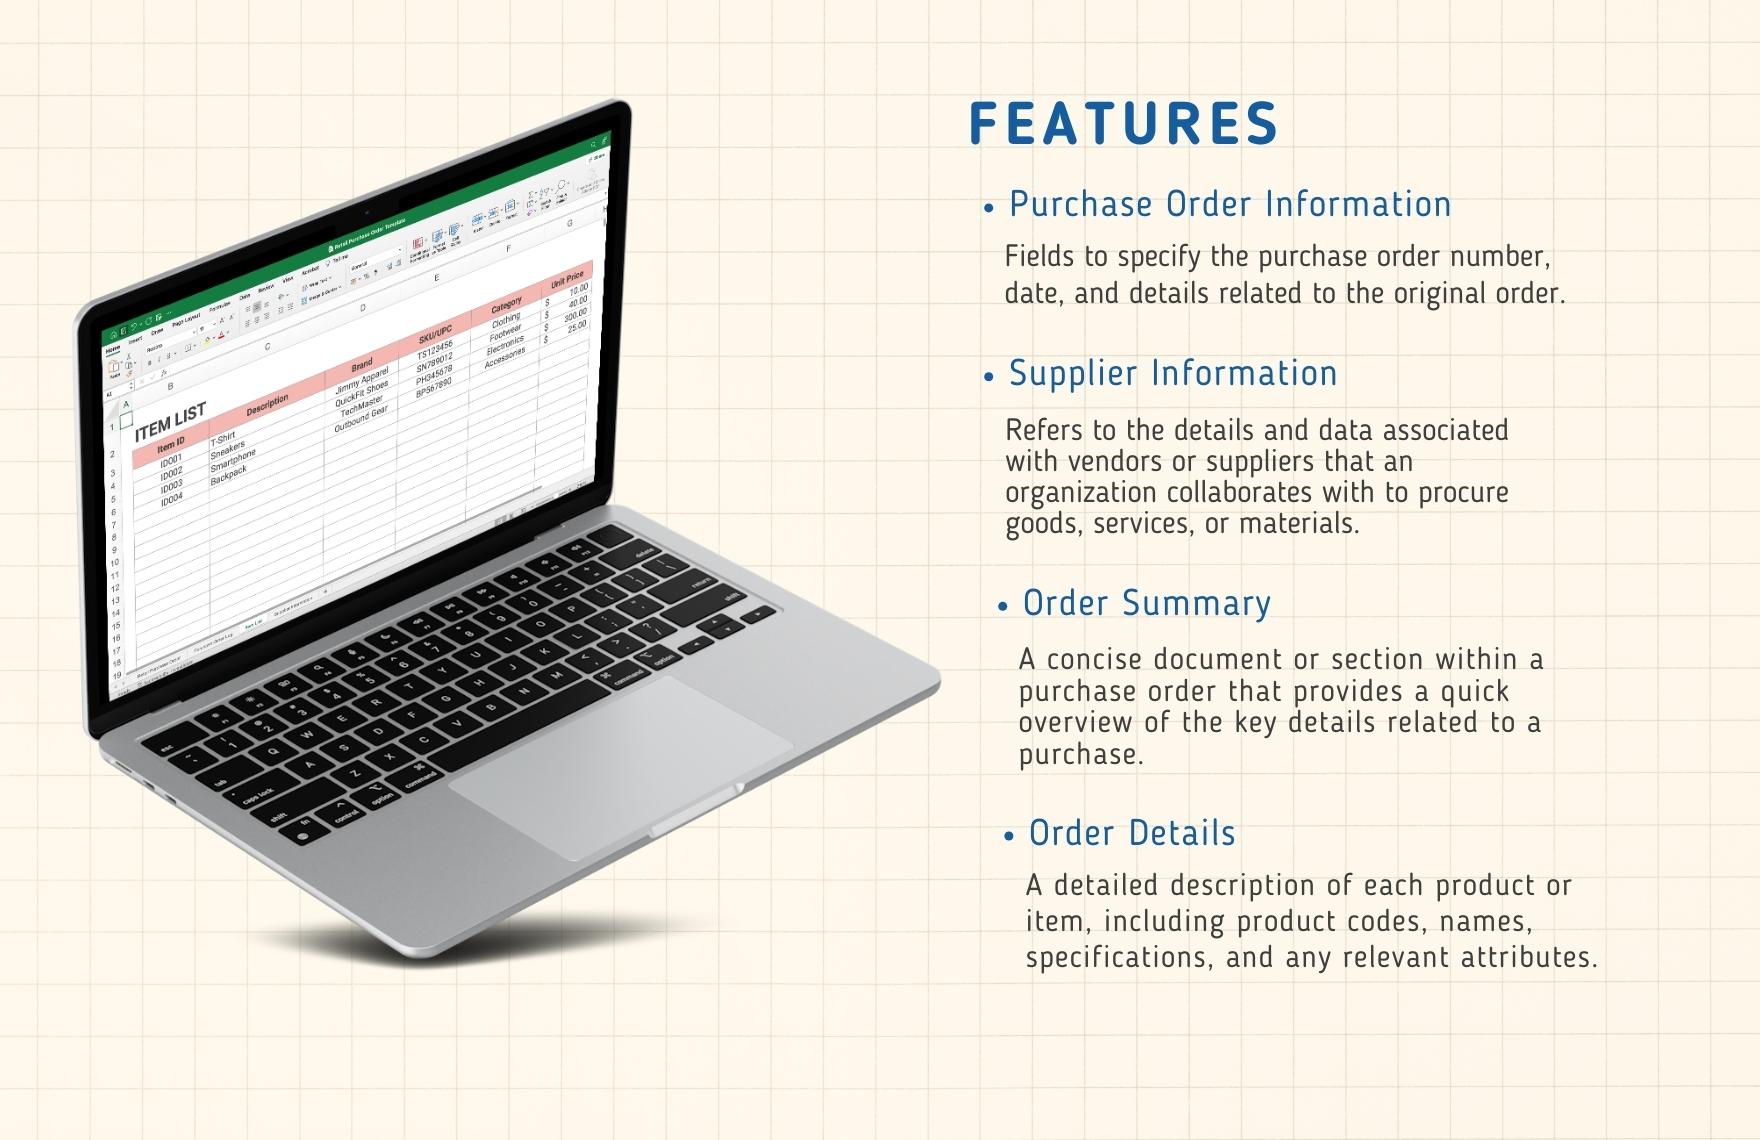 Retail Purchase Order Template